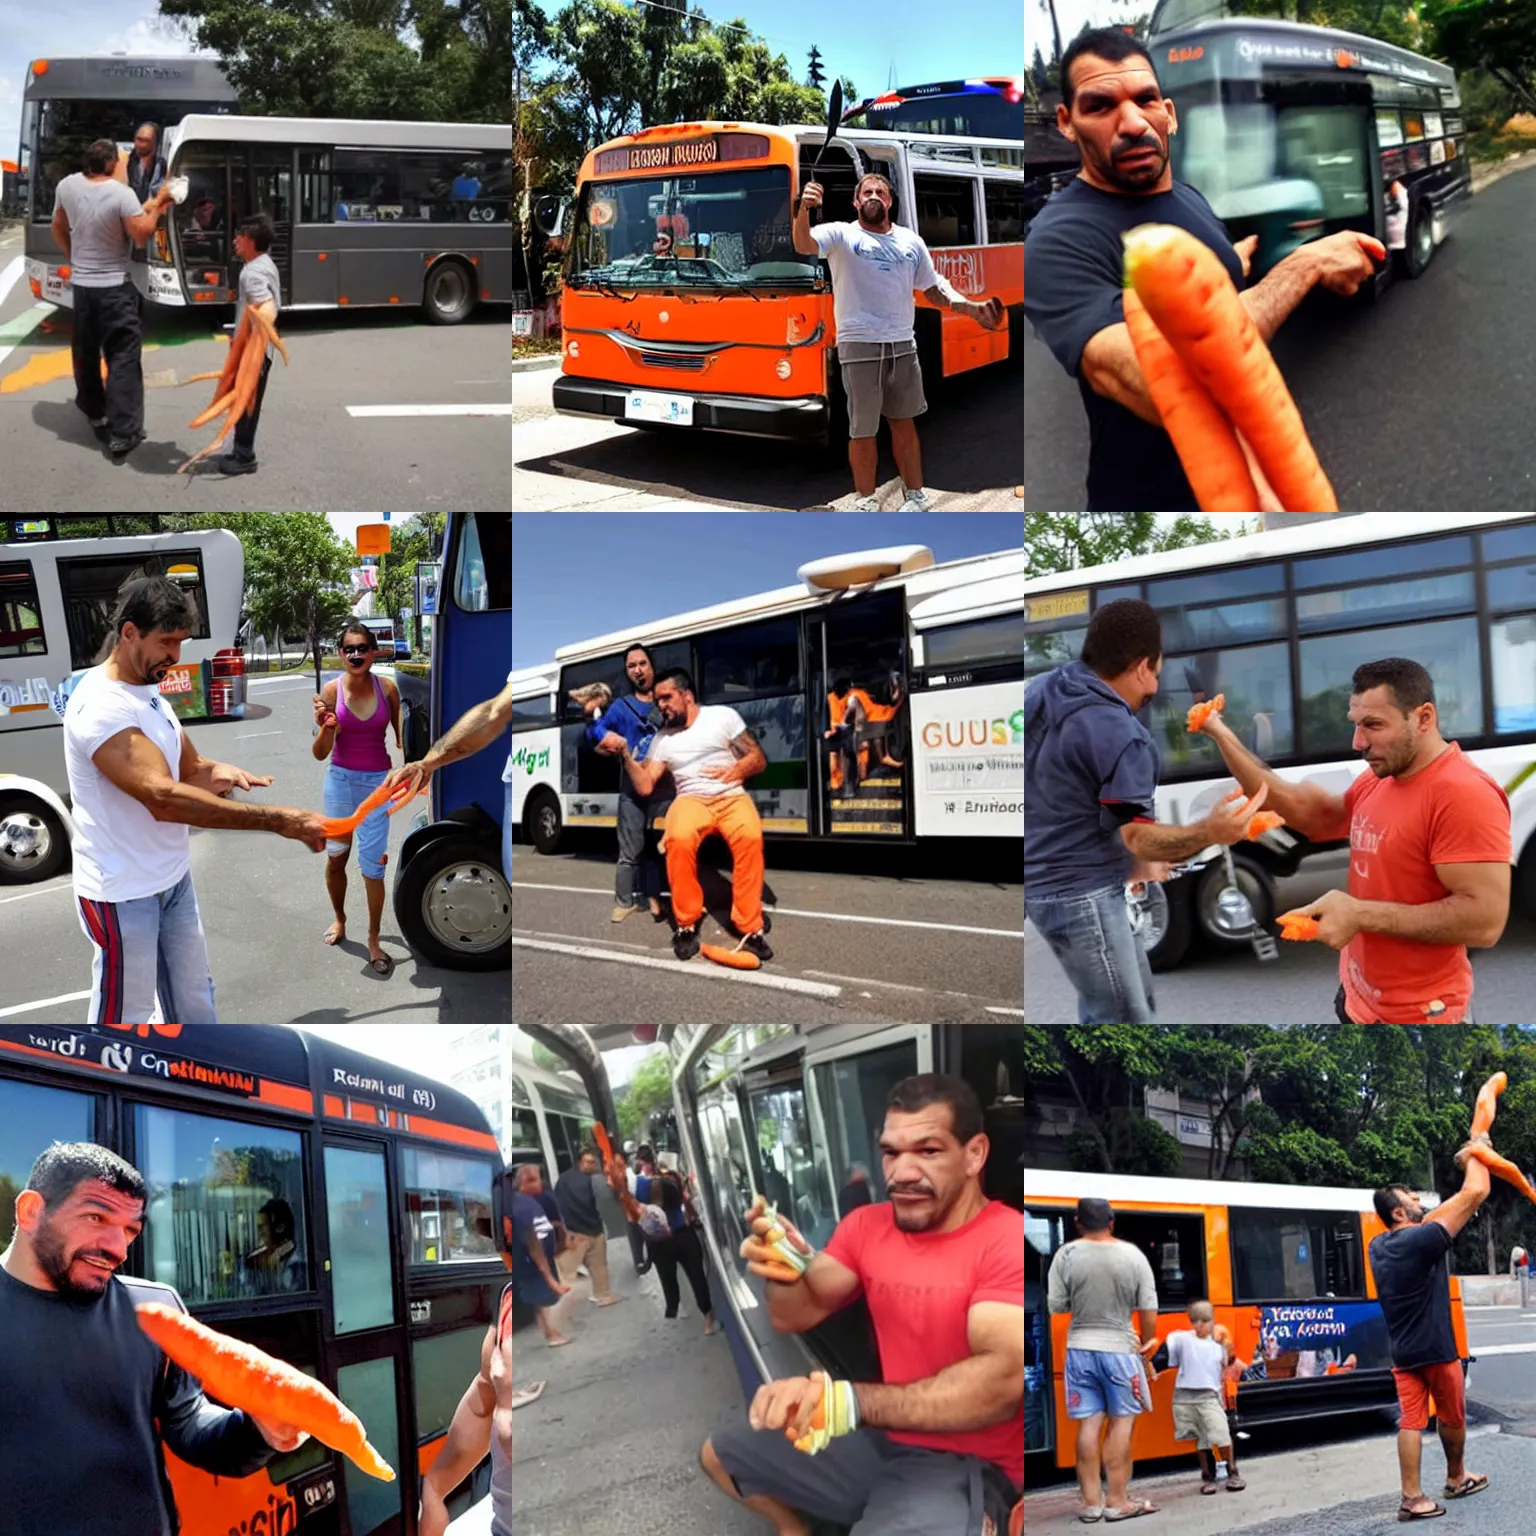 Prompt: antonio rodrigo nogueira holds a carrot up to a bus while antonio rogerio nogueira pets the bus with his hand ; google street view photo